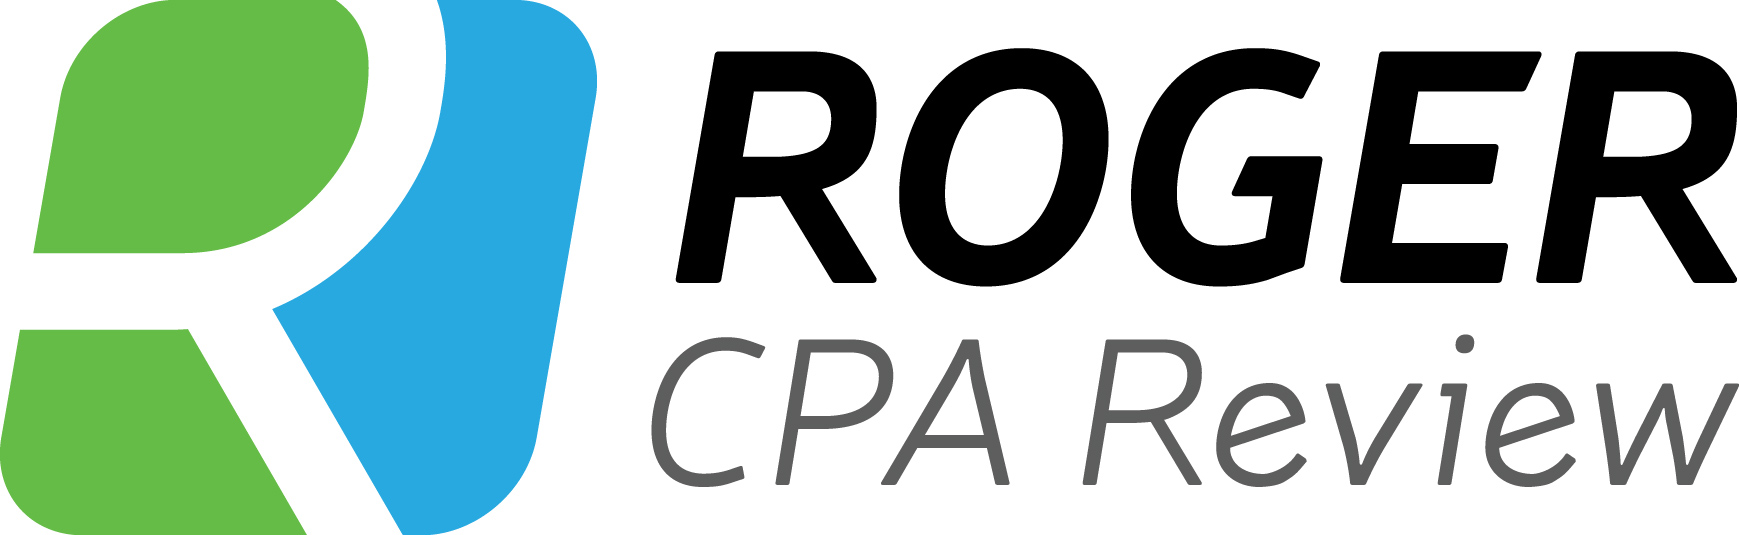 Roger Cpa Review Discount